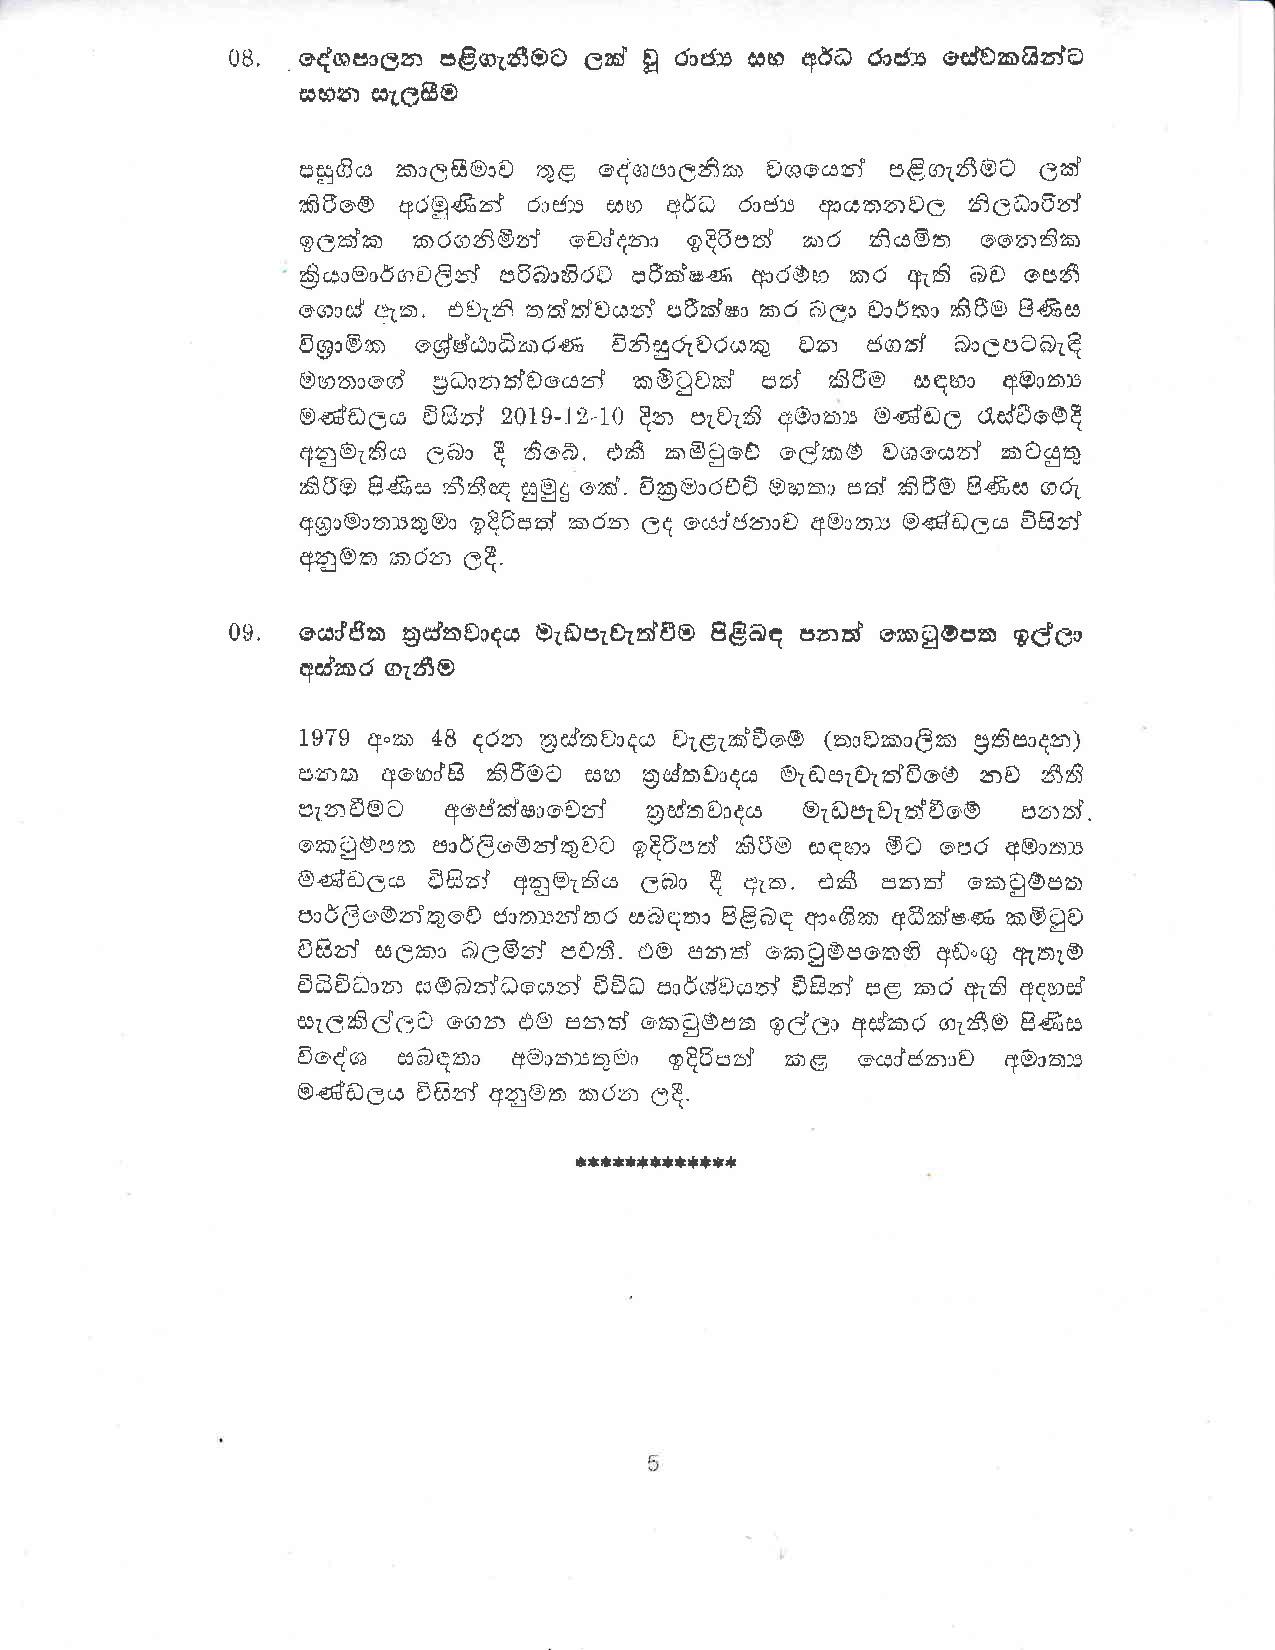 Cabinet Decision on 02.01.2020 page 005